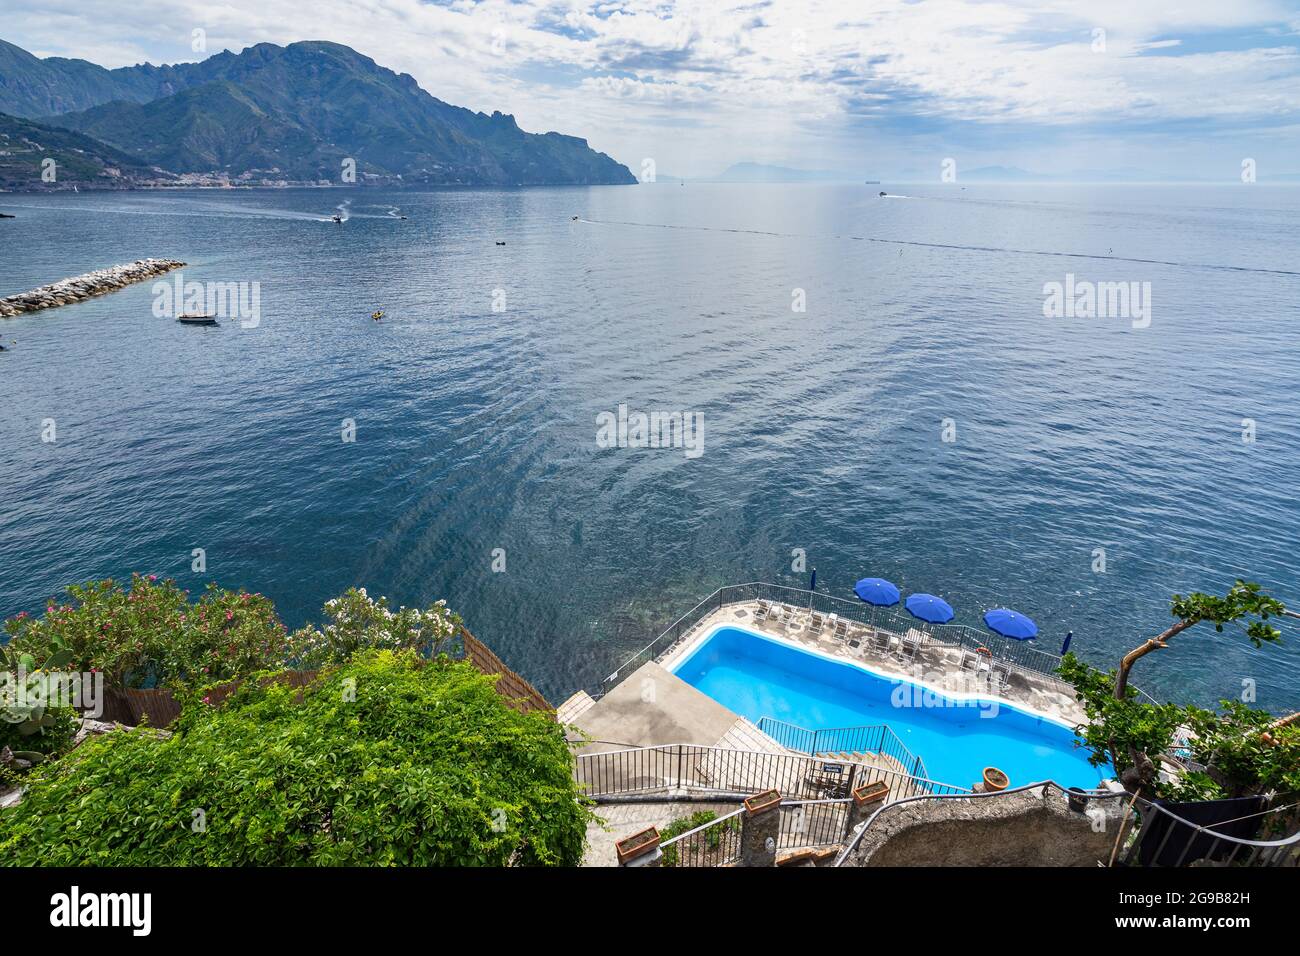 A charming swimming pool overlooking on the Mediterranean Sea in Amalfi, Italy Stock Photo